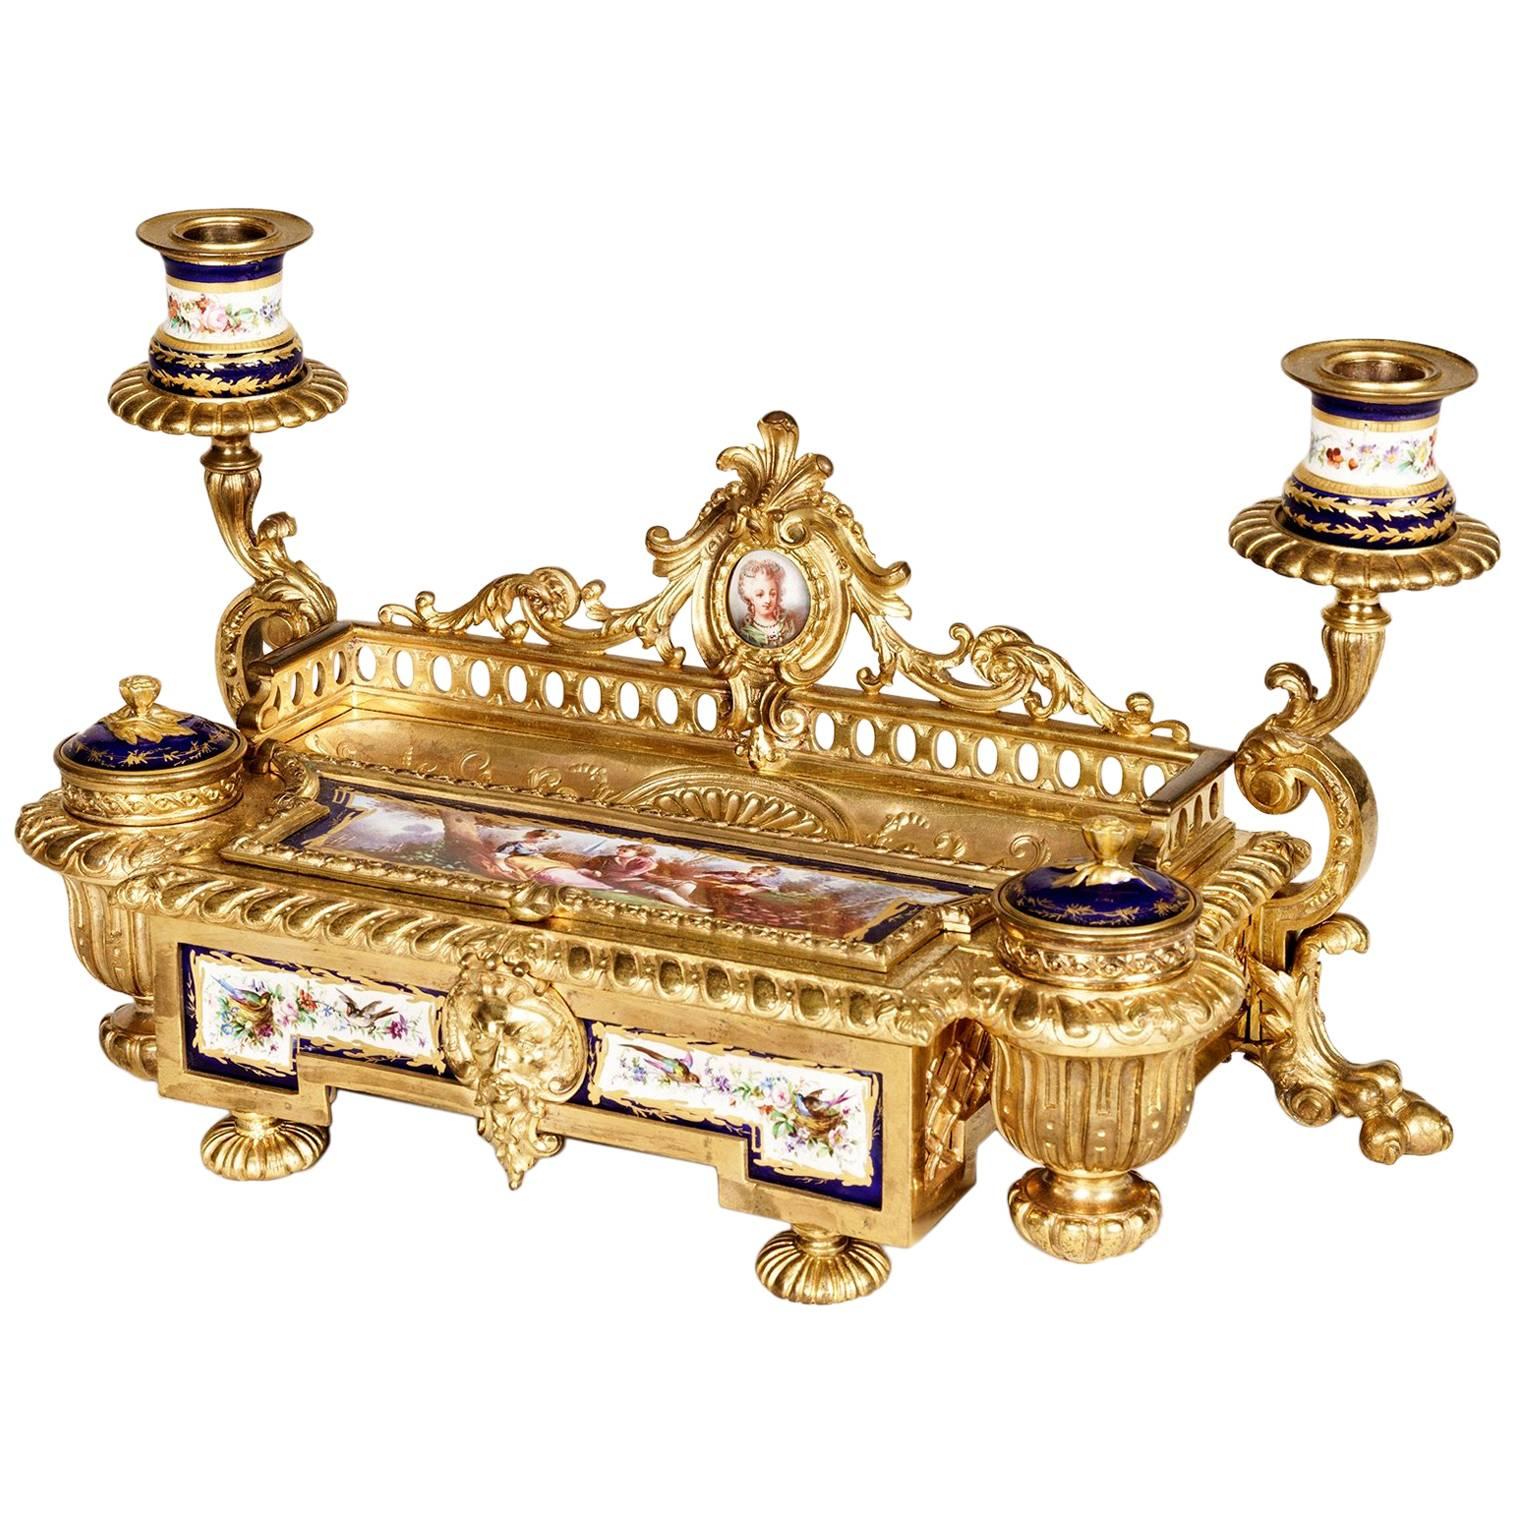 Royal Blue Porcelain and Gilt Bronze Inkwell and Pen Tray in the Louis XVI Taste